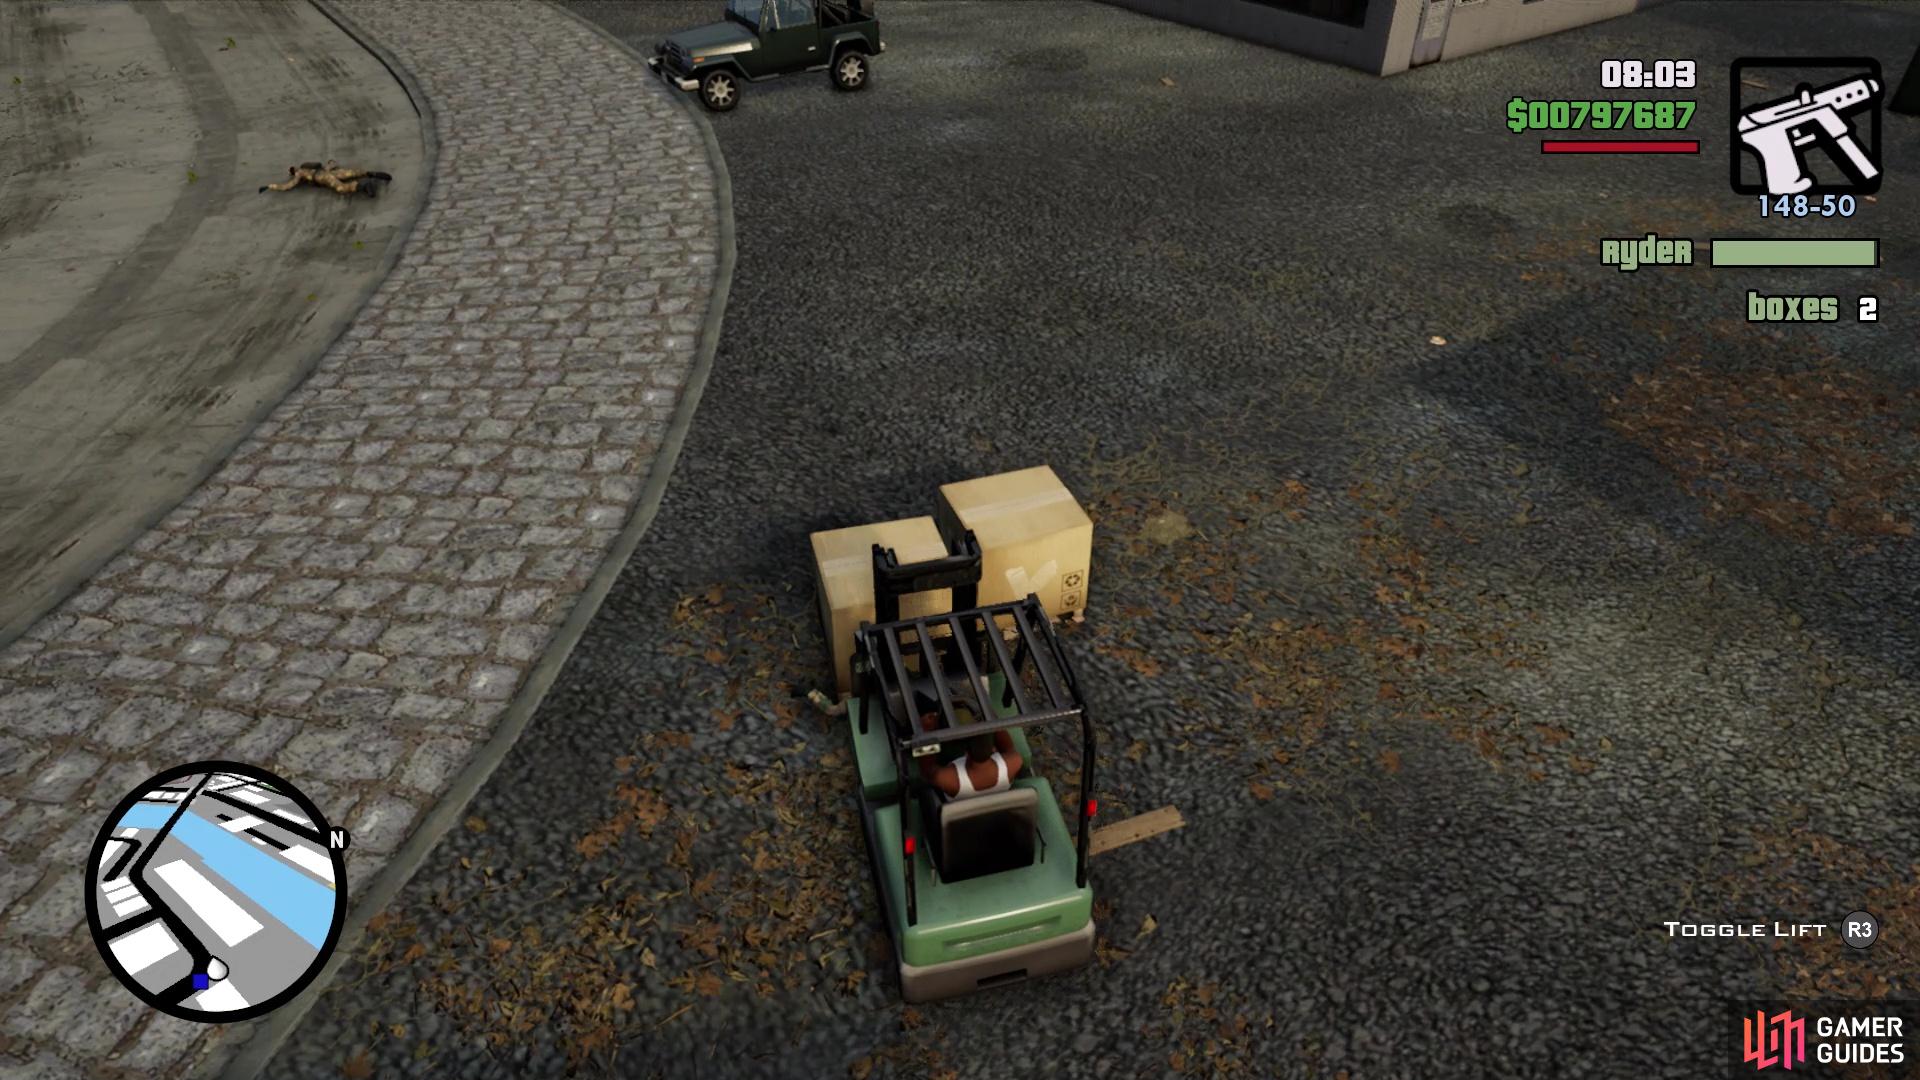 There will be two more crates right outside the warehouse when you need them